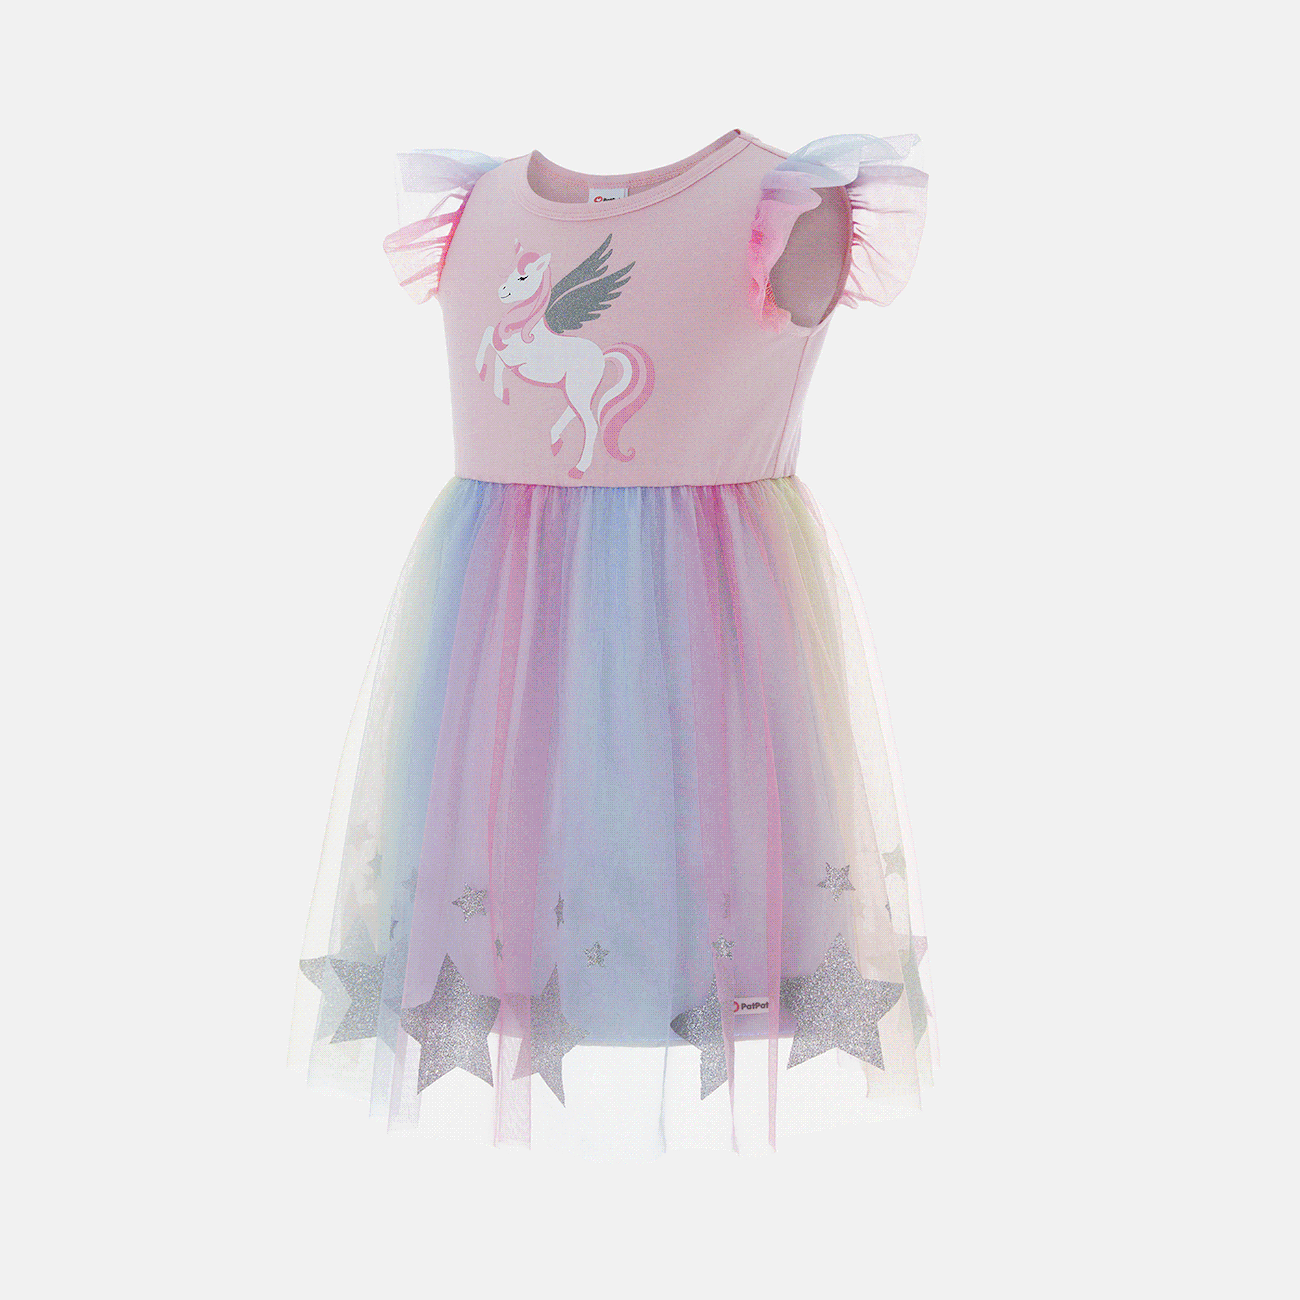 Go-Glow Illuminating Unicorn Dress With Light Up Skirt Including Controller (Built-In Battery) Multi-color big image 1